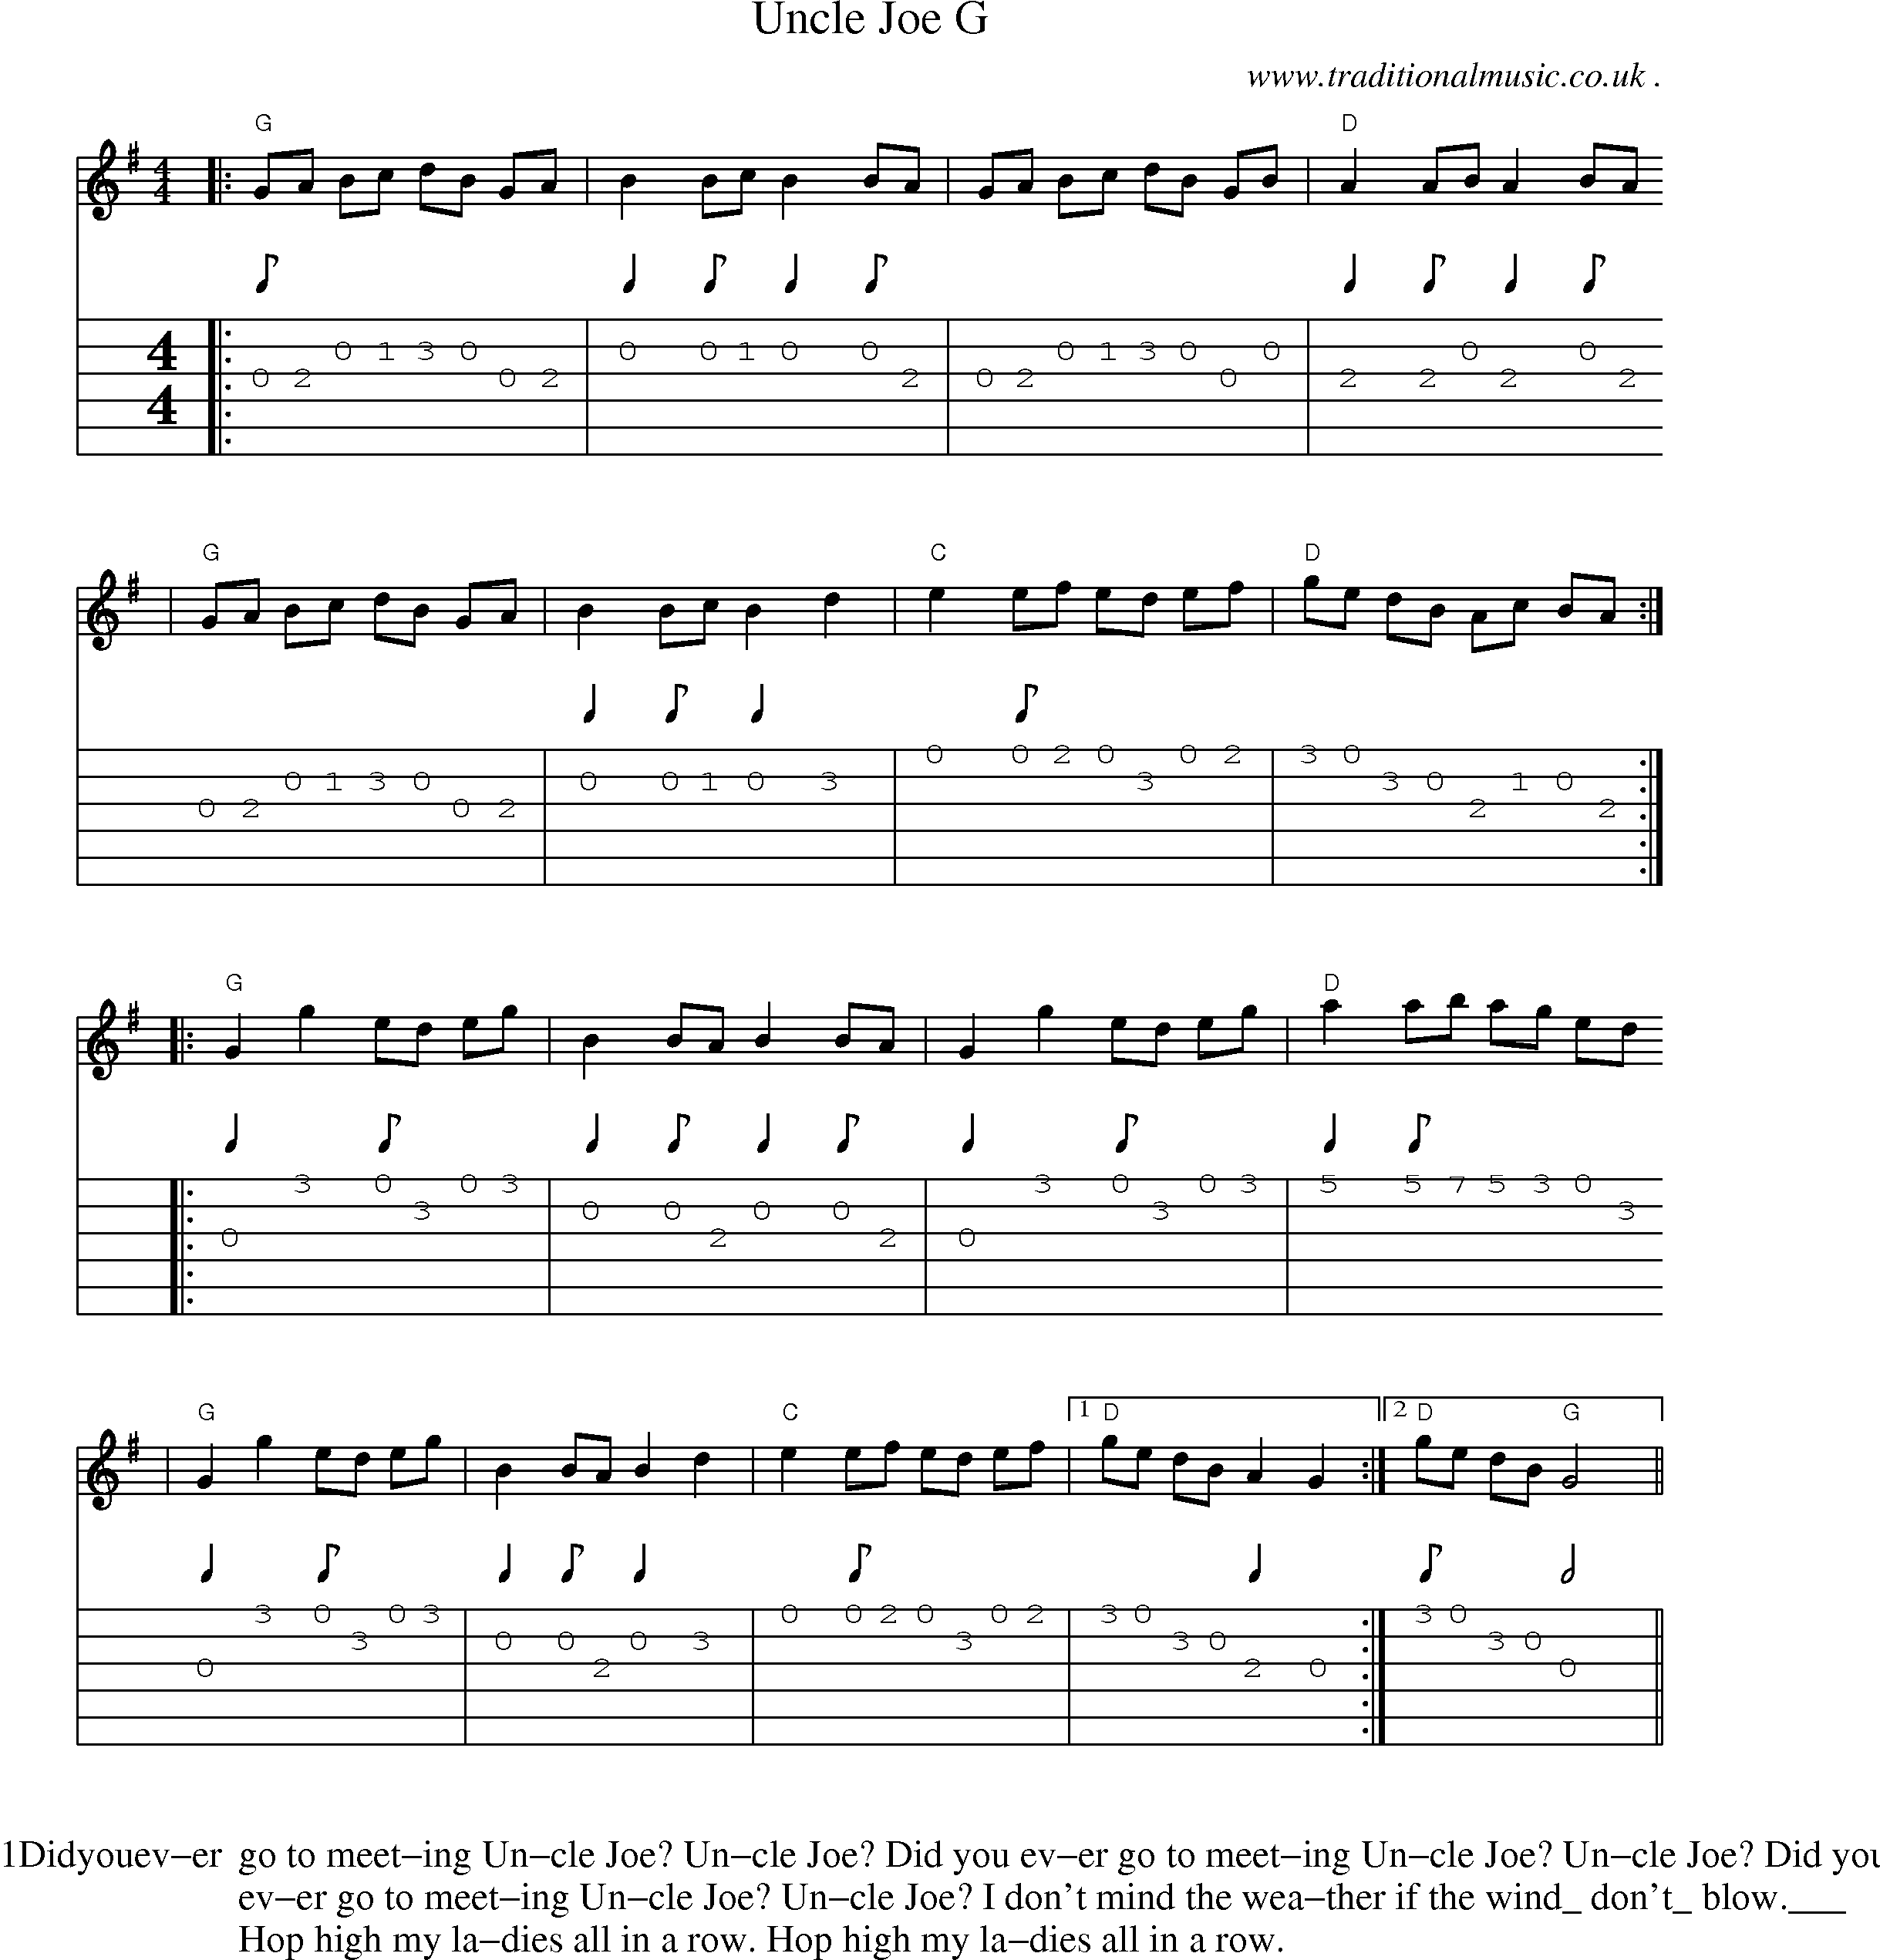 Music Score and Guitar Tabs for Uncle Joe G